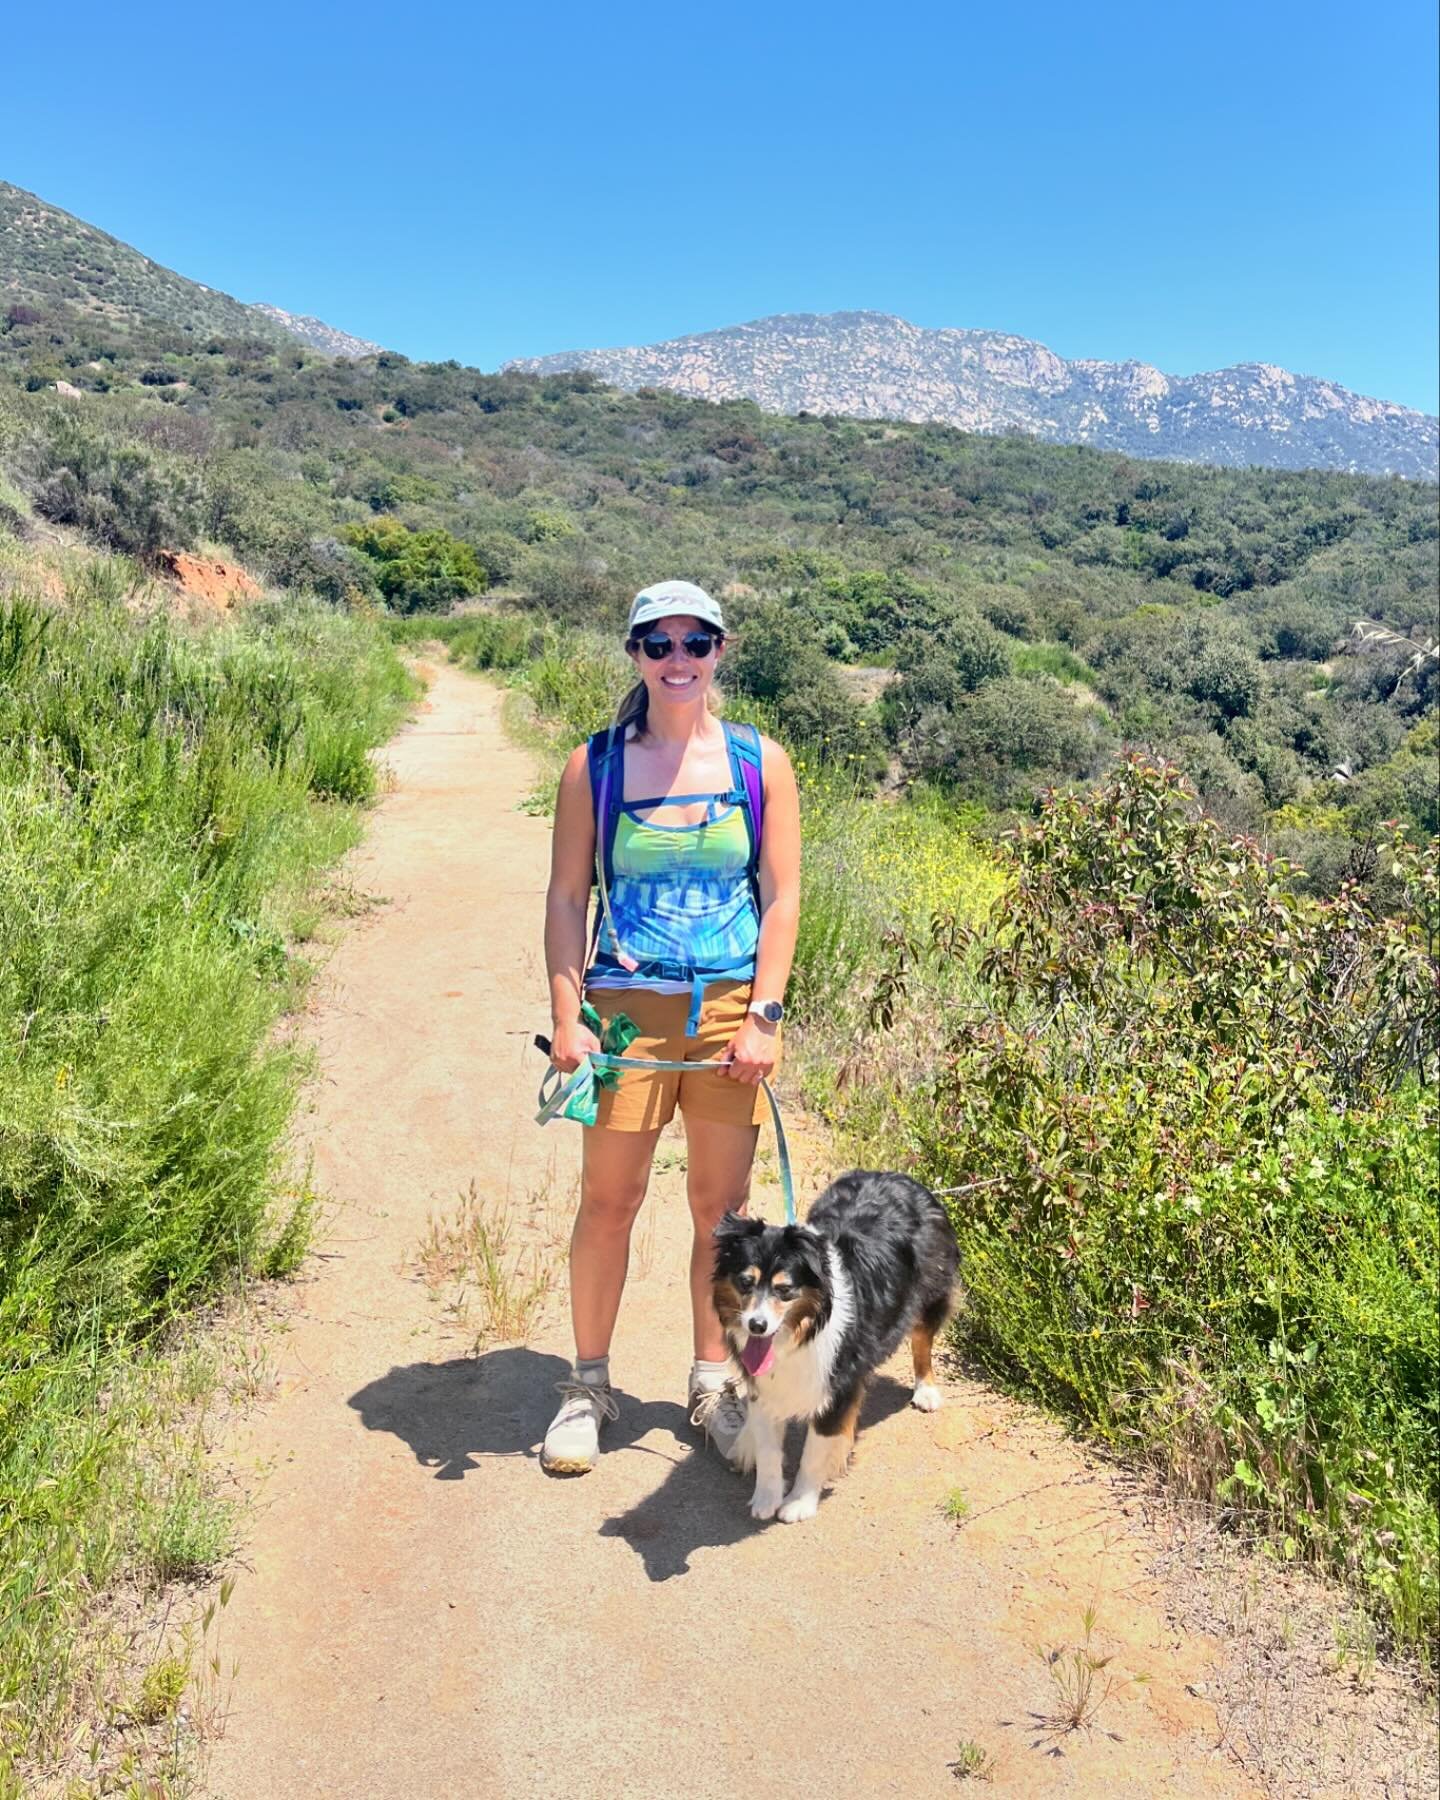 HELLHOLE CANYON PRESERVE 🔥 While most of the world enjoyed a temperate April, today it was August in Hellhole Canyon. 🥵 

The appropriately named preserve was about 90 degrees while the rest of San Diego enjoyed a 70 degree spring day.☀️ 

I can&rs